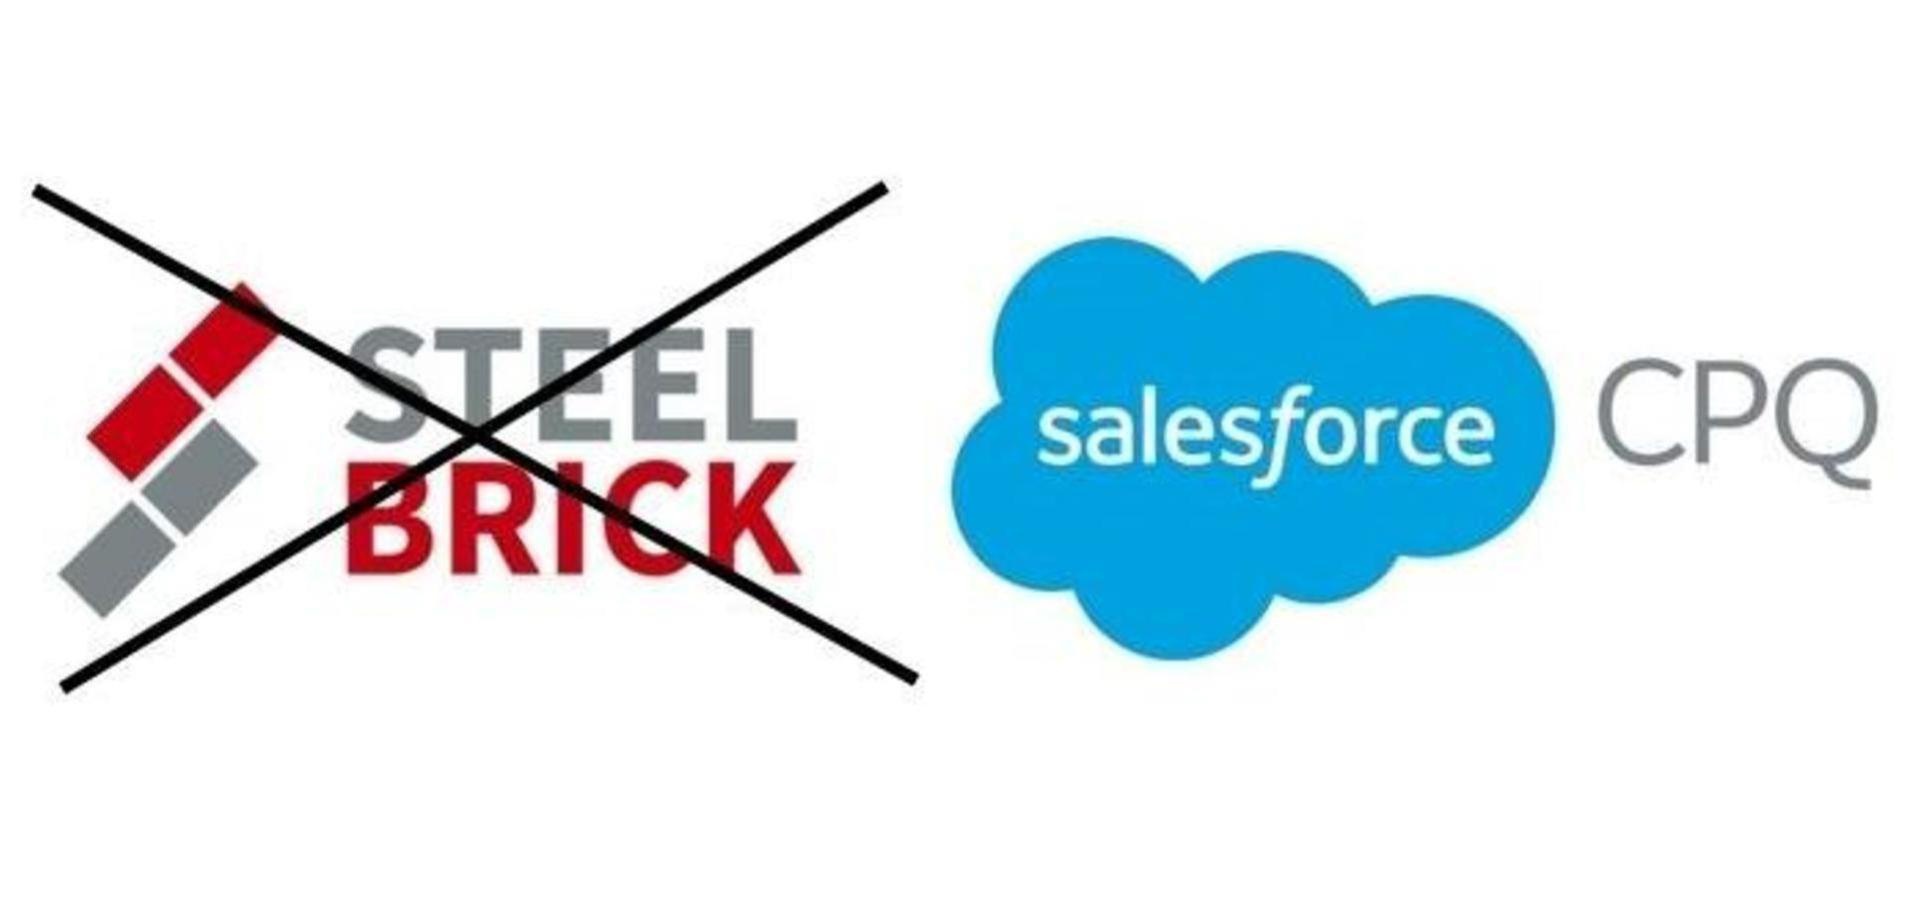 The Quote-to-Cash Formerly Known as Steelbrick: Salesforce CPQ is Here